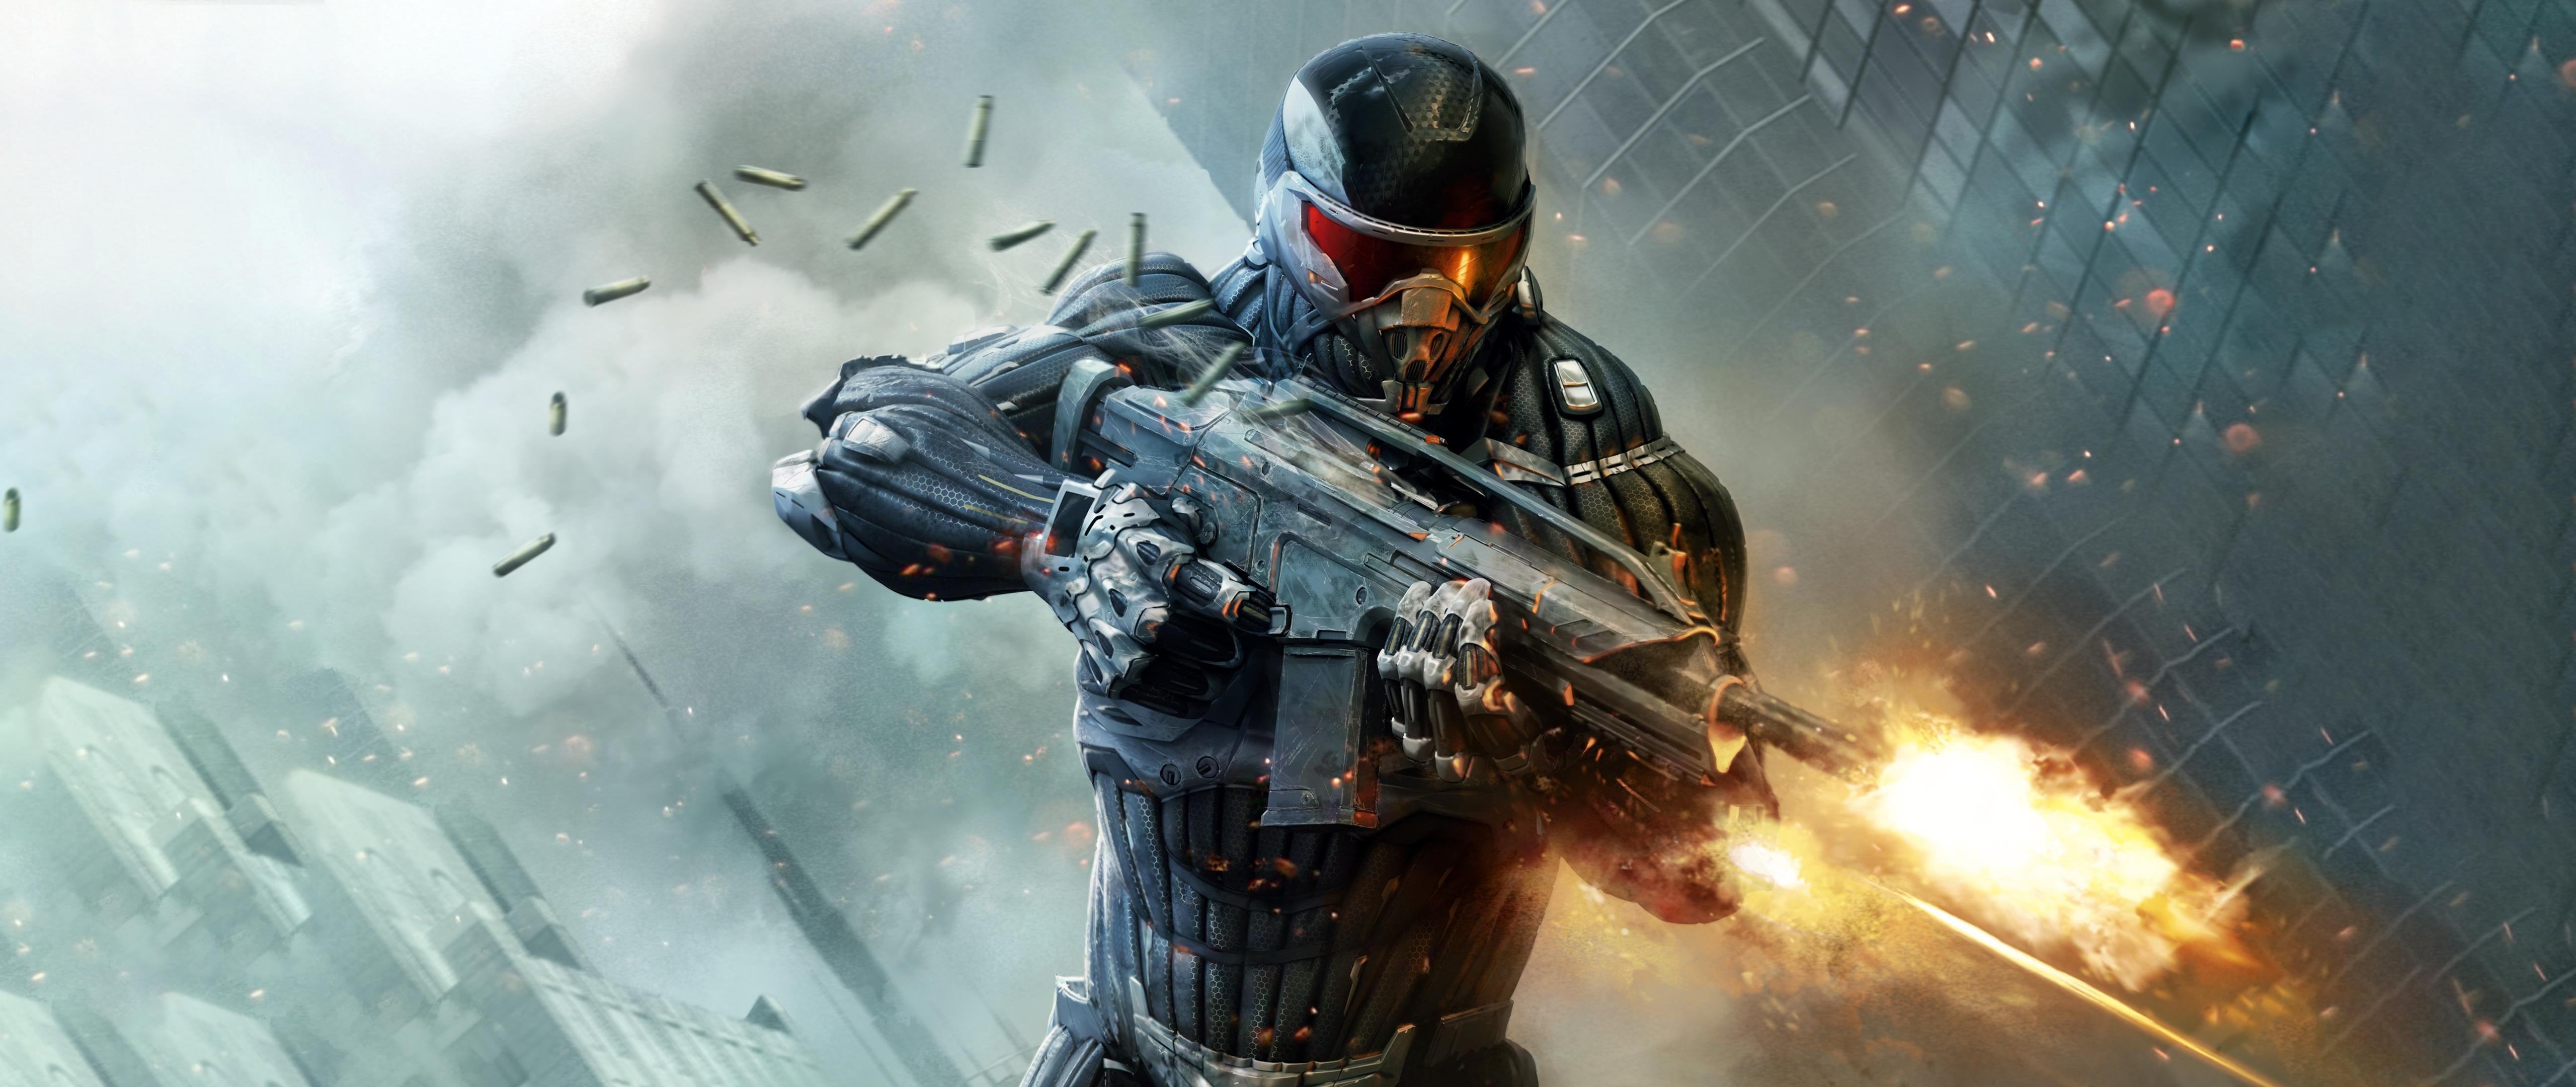 Game Wallpaper Crysis Video Games Ultra Wide Ultrawide Hd